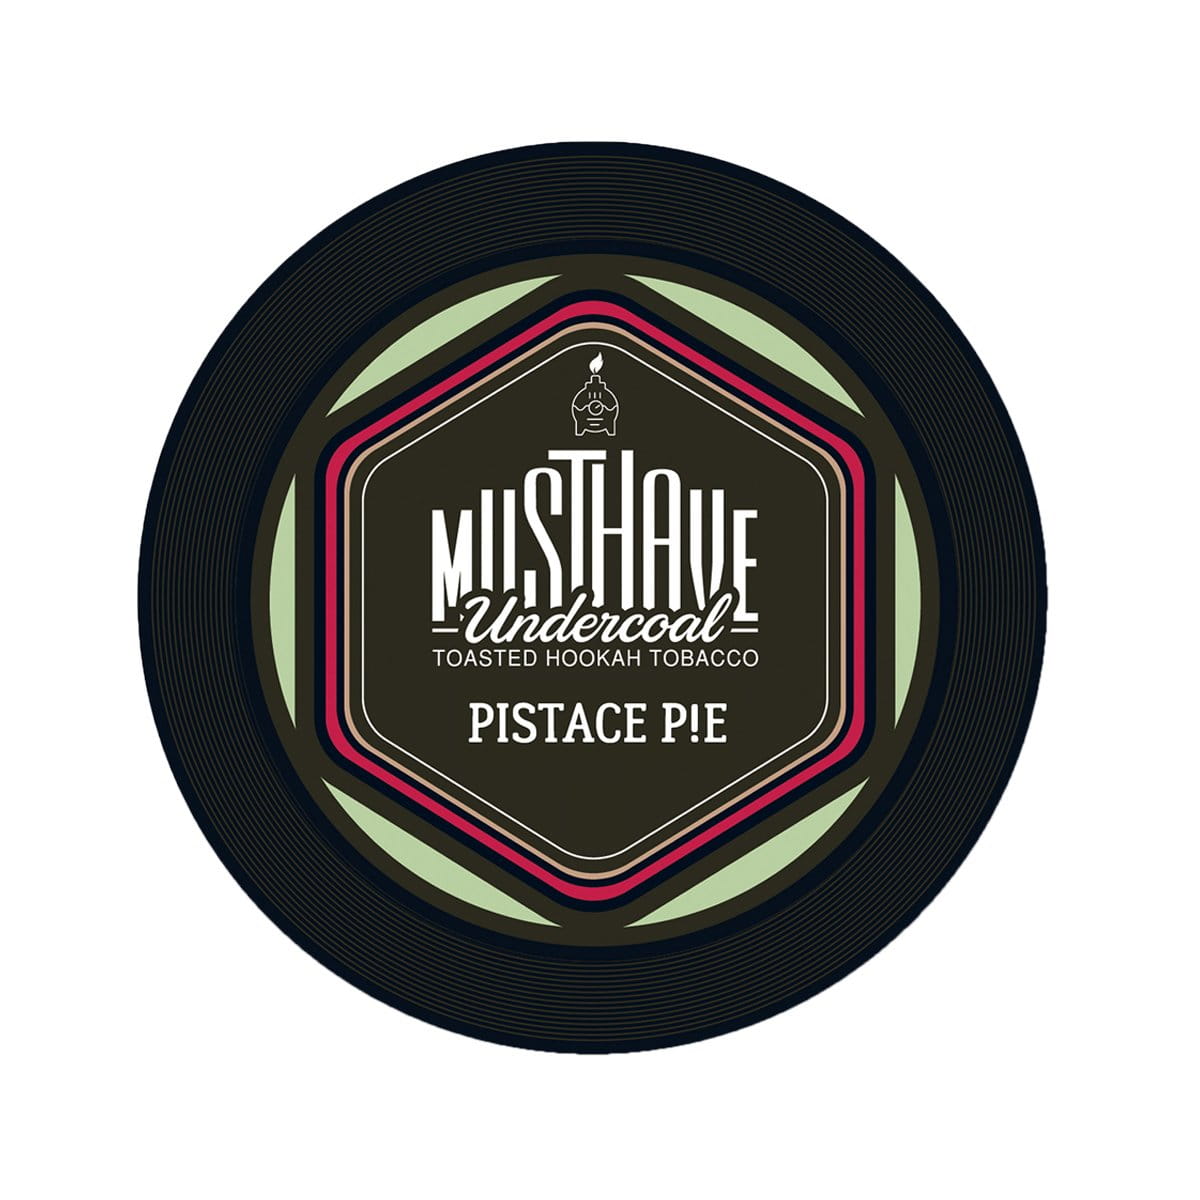 Musthave Tobacco - Pistace P!e 25g